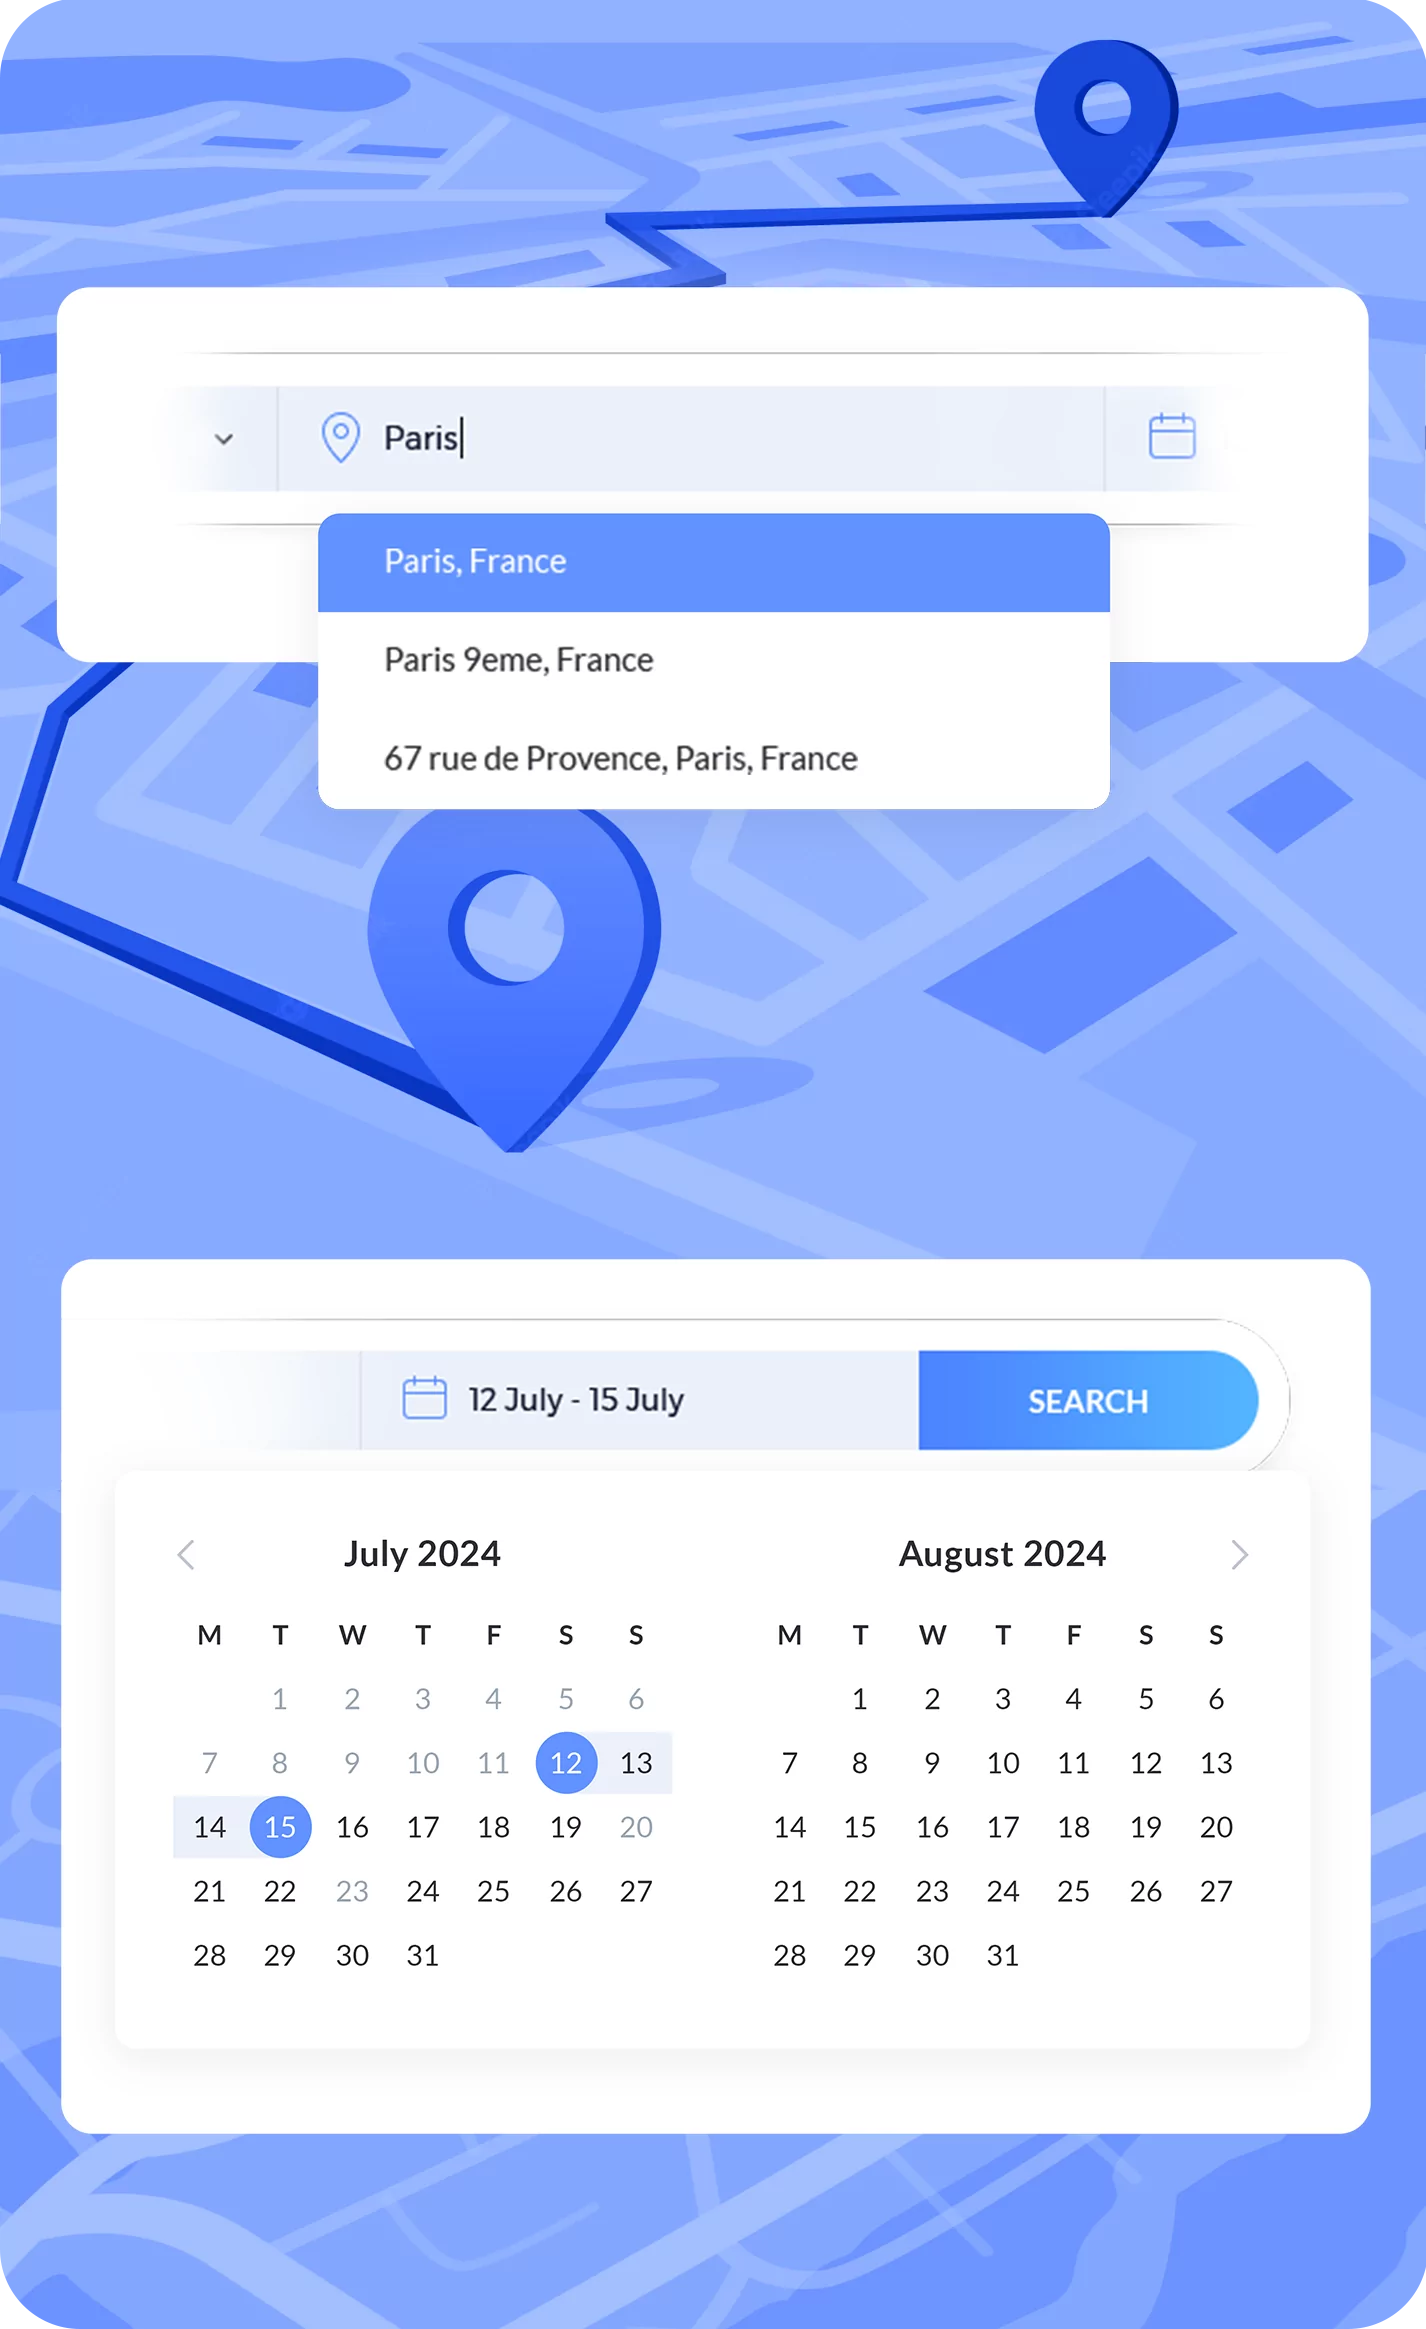 Search by date and location on a marketplace